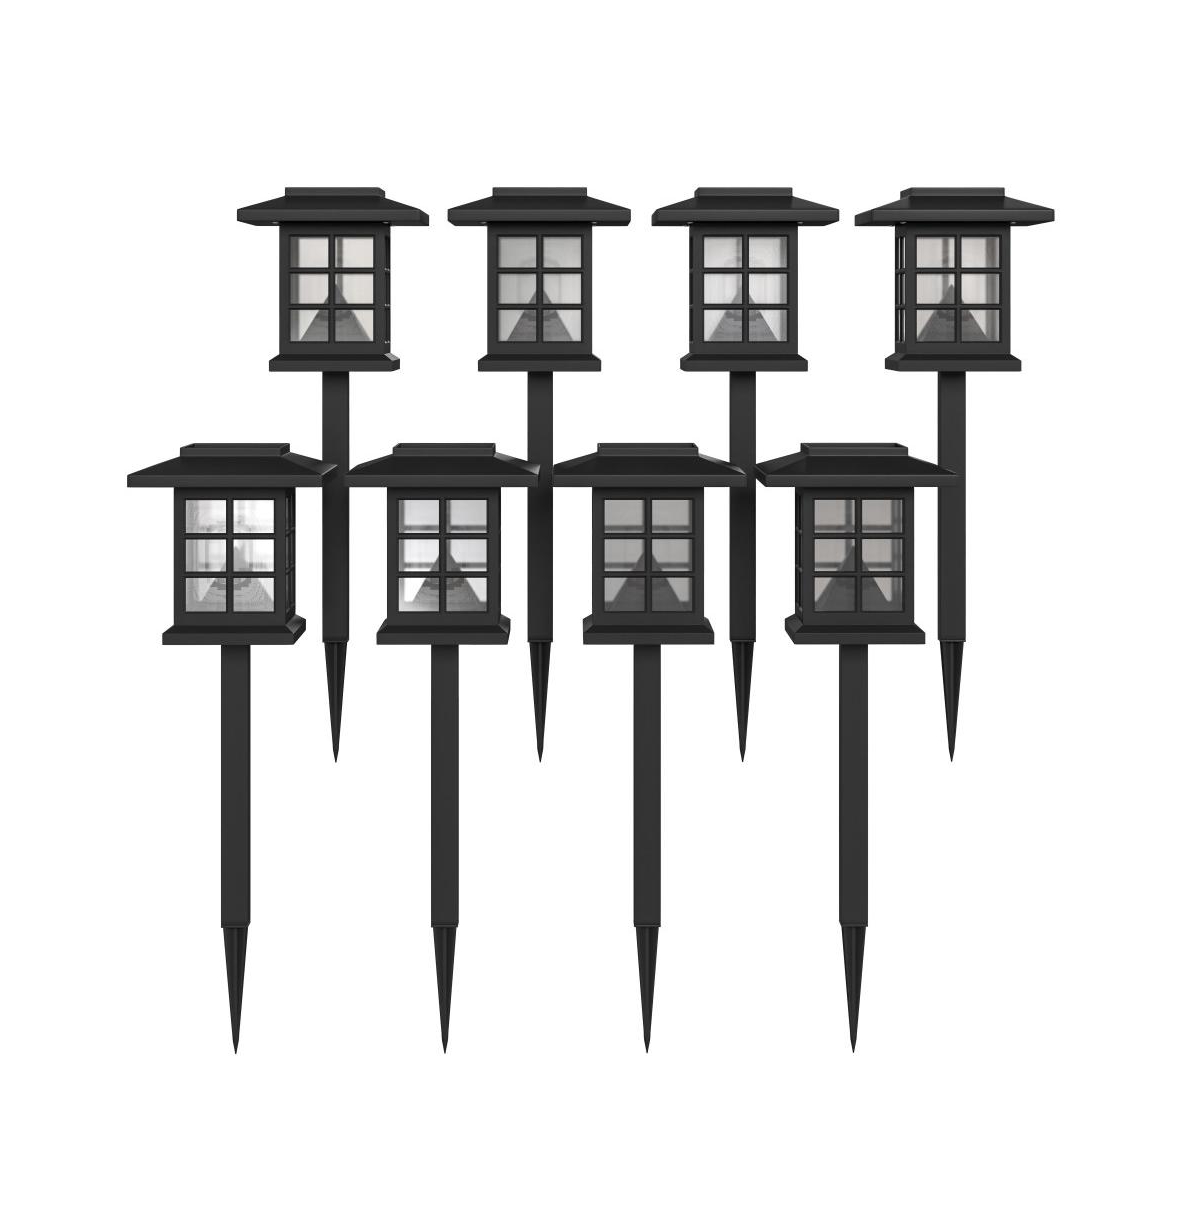 Lantern Style All-Weather Outdoor Led Solar Lights, Solar Powered Lights For Pathway, Garden, & Yard - Set Of 8 - Black